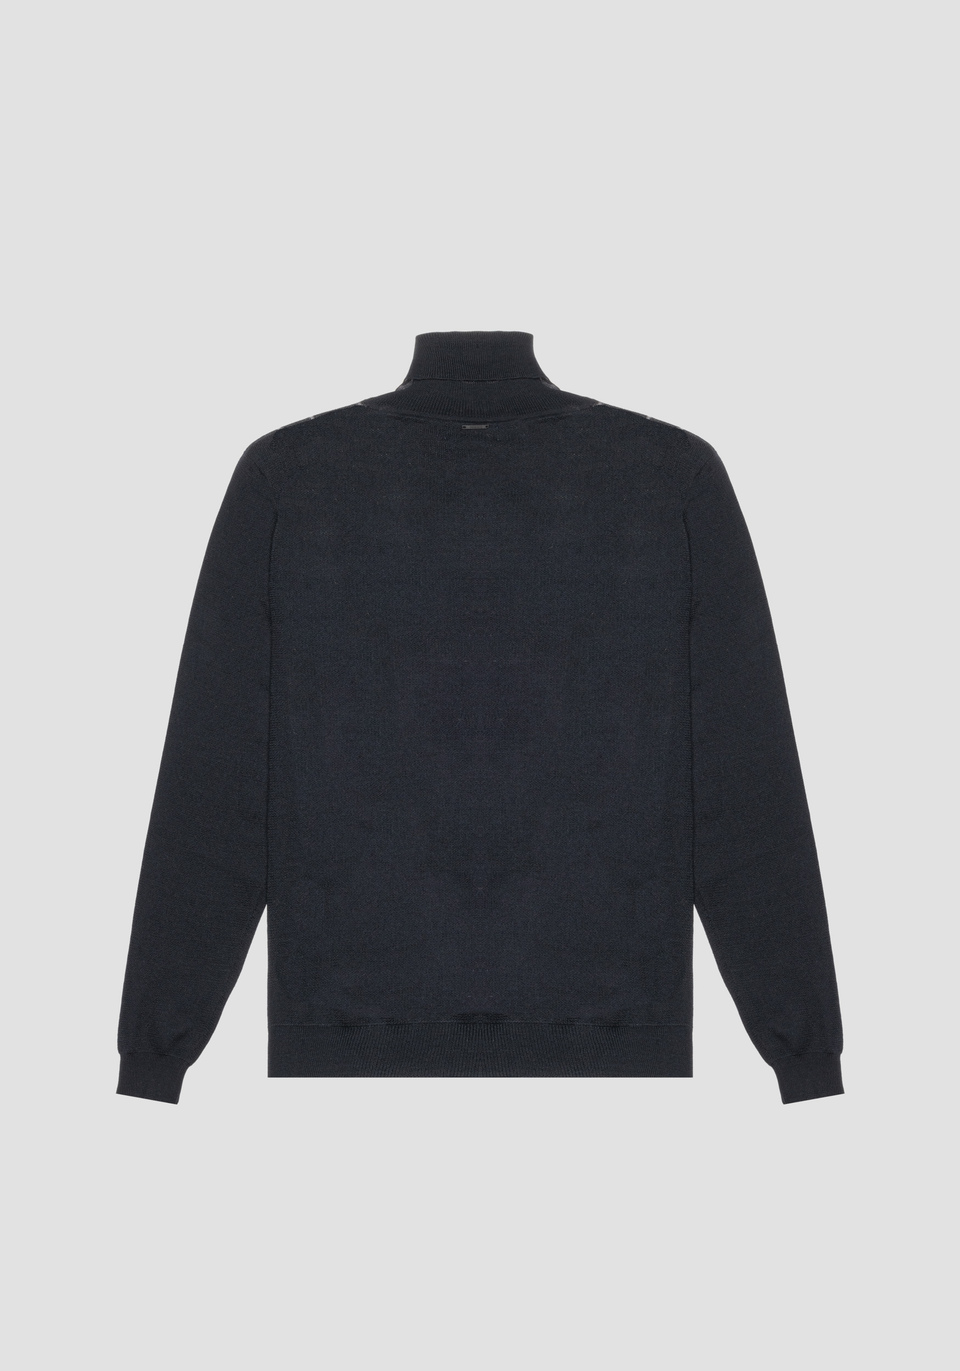 REGULAR FIT SWEATER IN WOOL BLEND YARN WITH ABSTRACT JACQUARD PATTERN - Antony Morato Online Shop